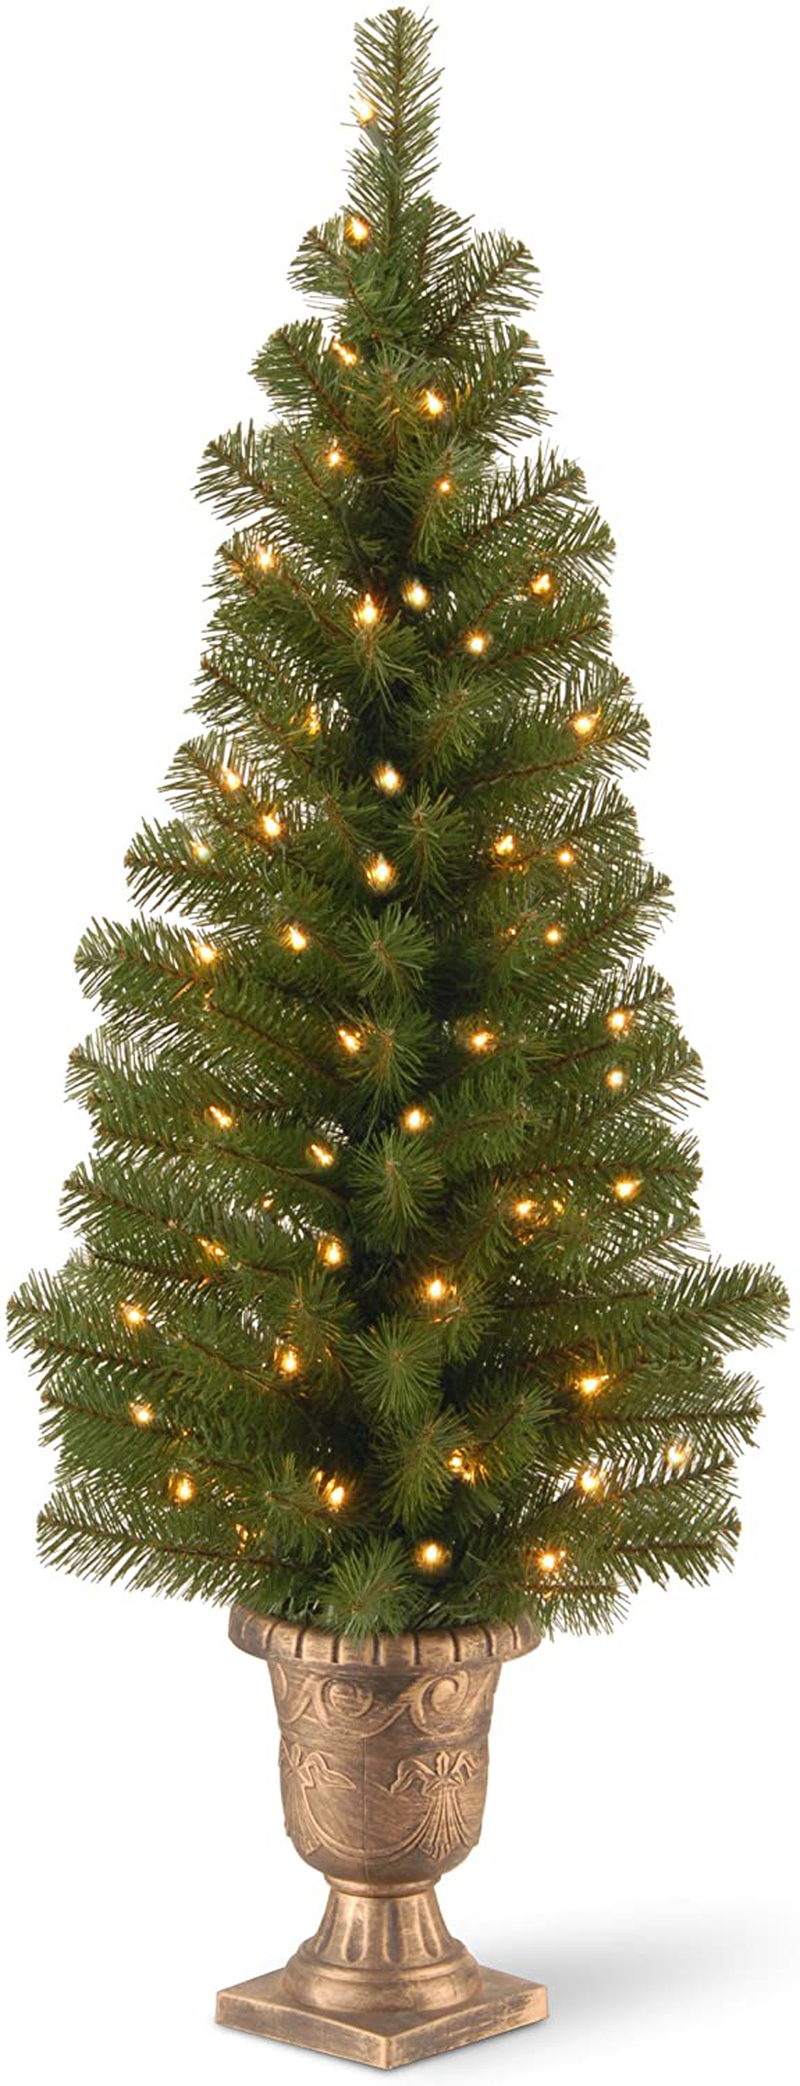 National Tree Company Pre-lit Artificial Christmas Tree For Entrances | Includes Pre-strung White Lights and Stand | Montclair Spruce - 5 ft Home & Garden > Decor > Seasonal & Holiday Decorations > Christmas Tree Stands National Tree Company Tree 4 ft 